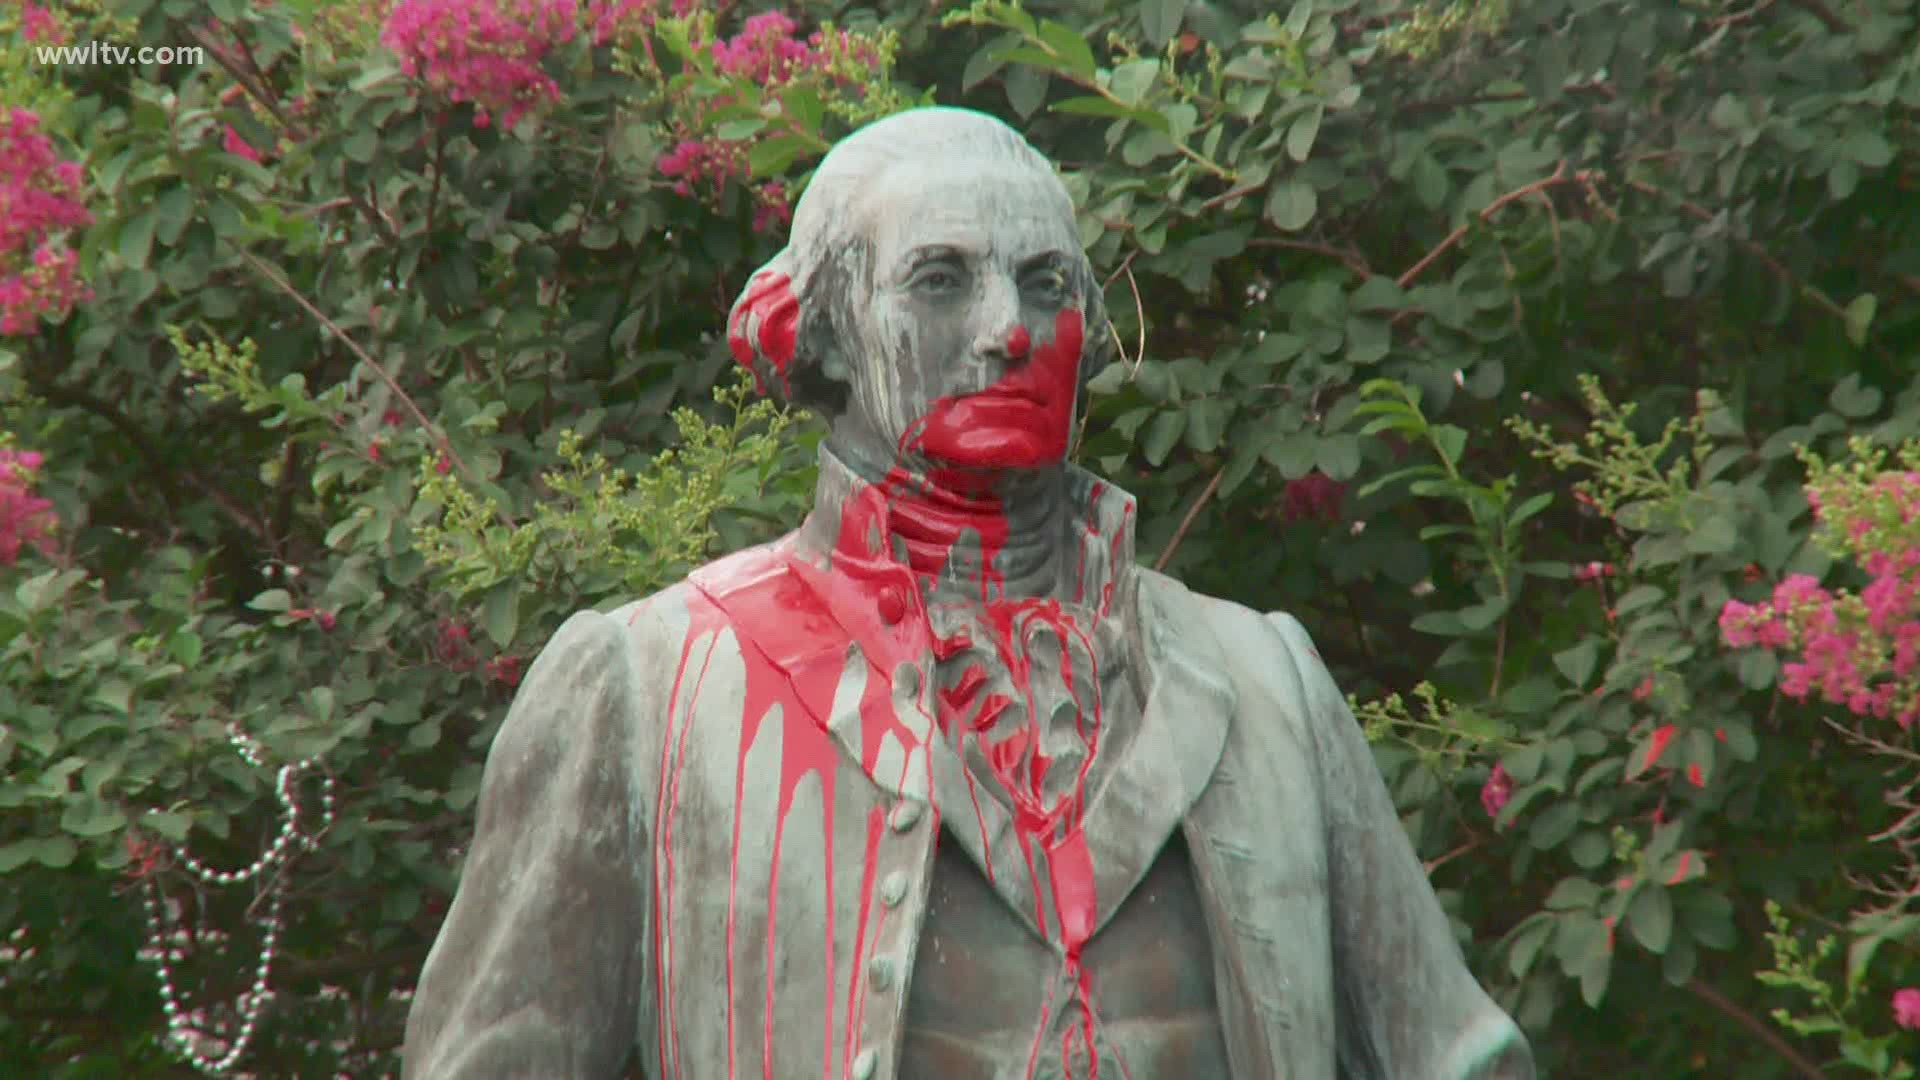 This is the latest of several statues vandalized in New Orleans over the past week.